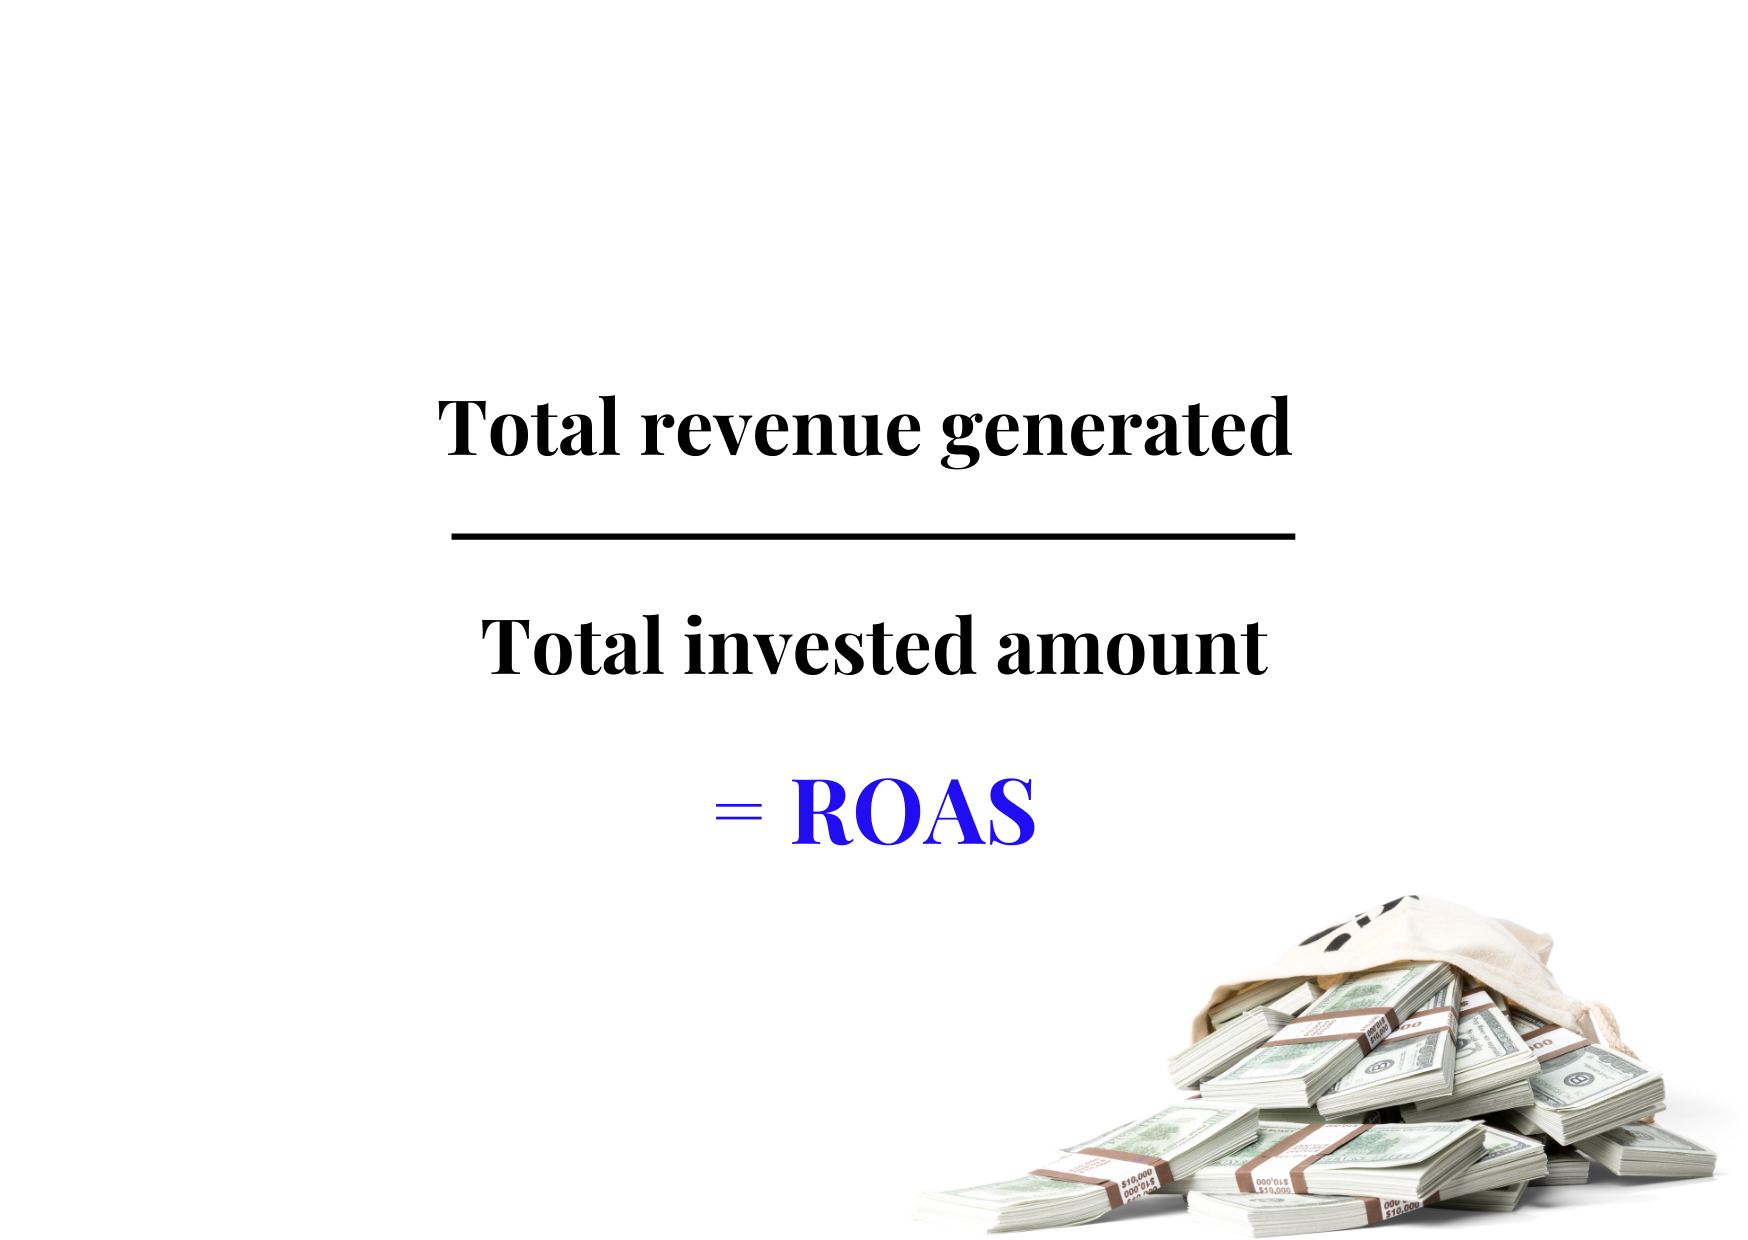 The formula is ROAS equal to total revenue generated divided by total invested amount